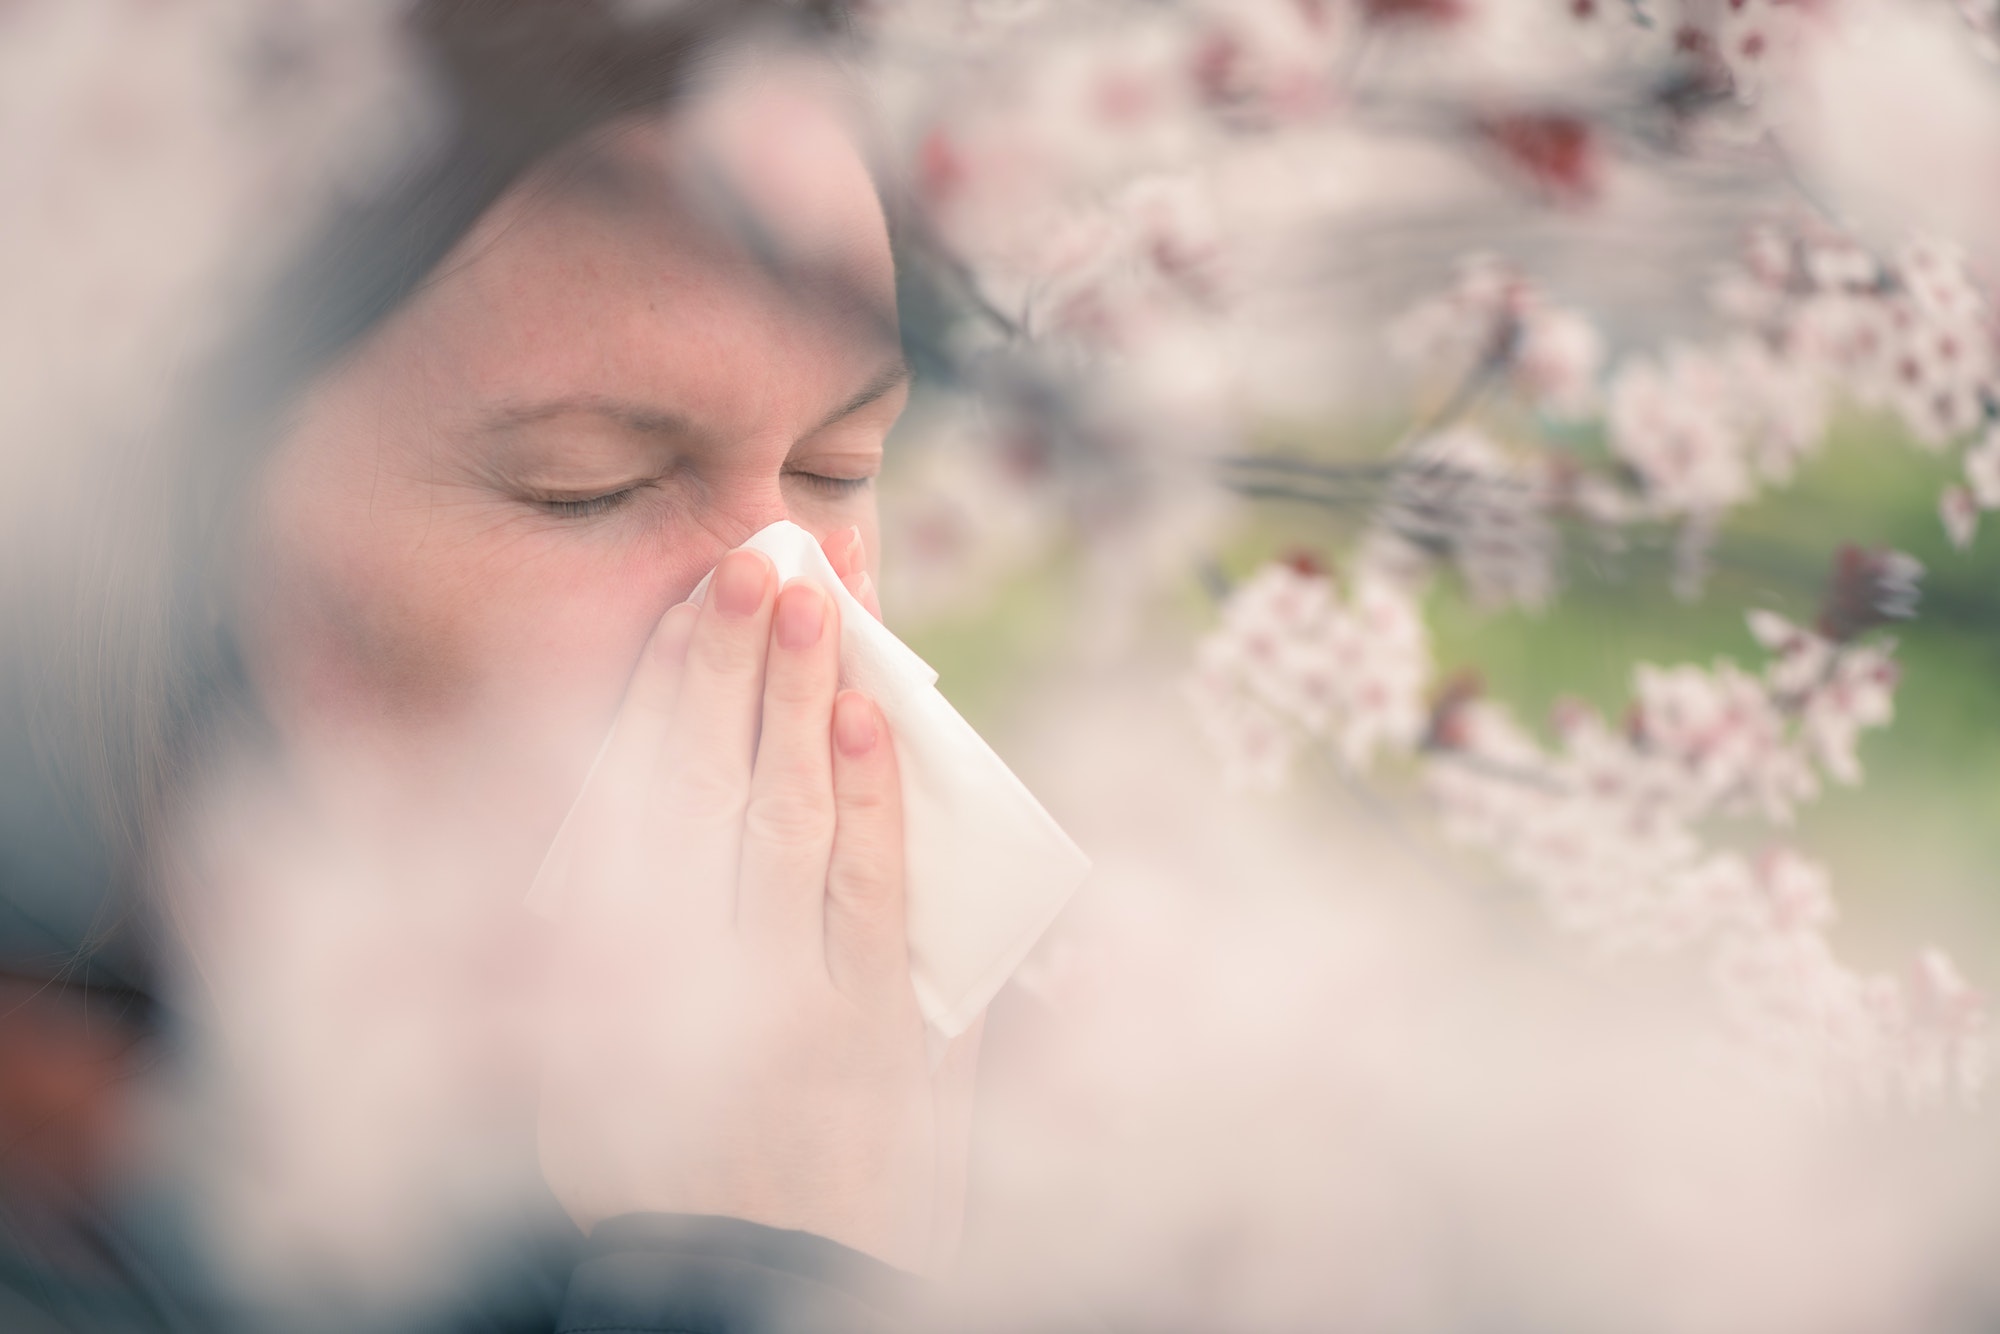 Woman sneezing in front of blooming cherry tree in spring